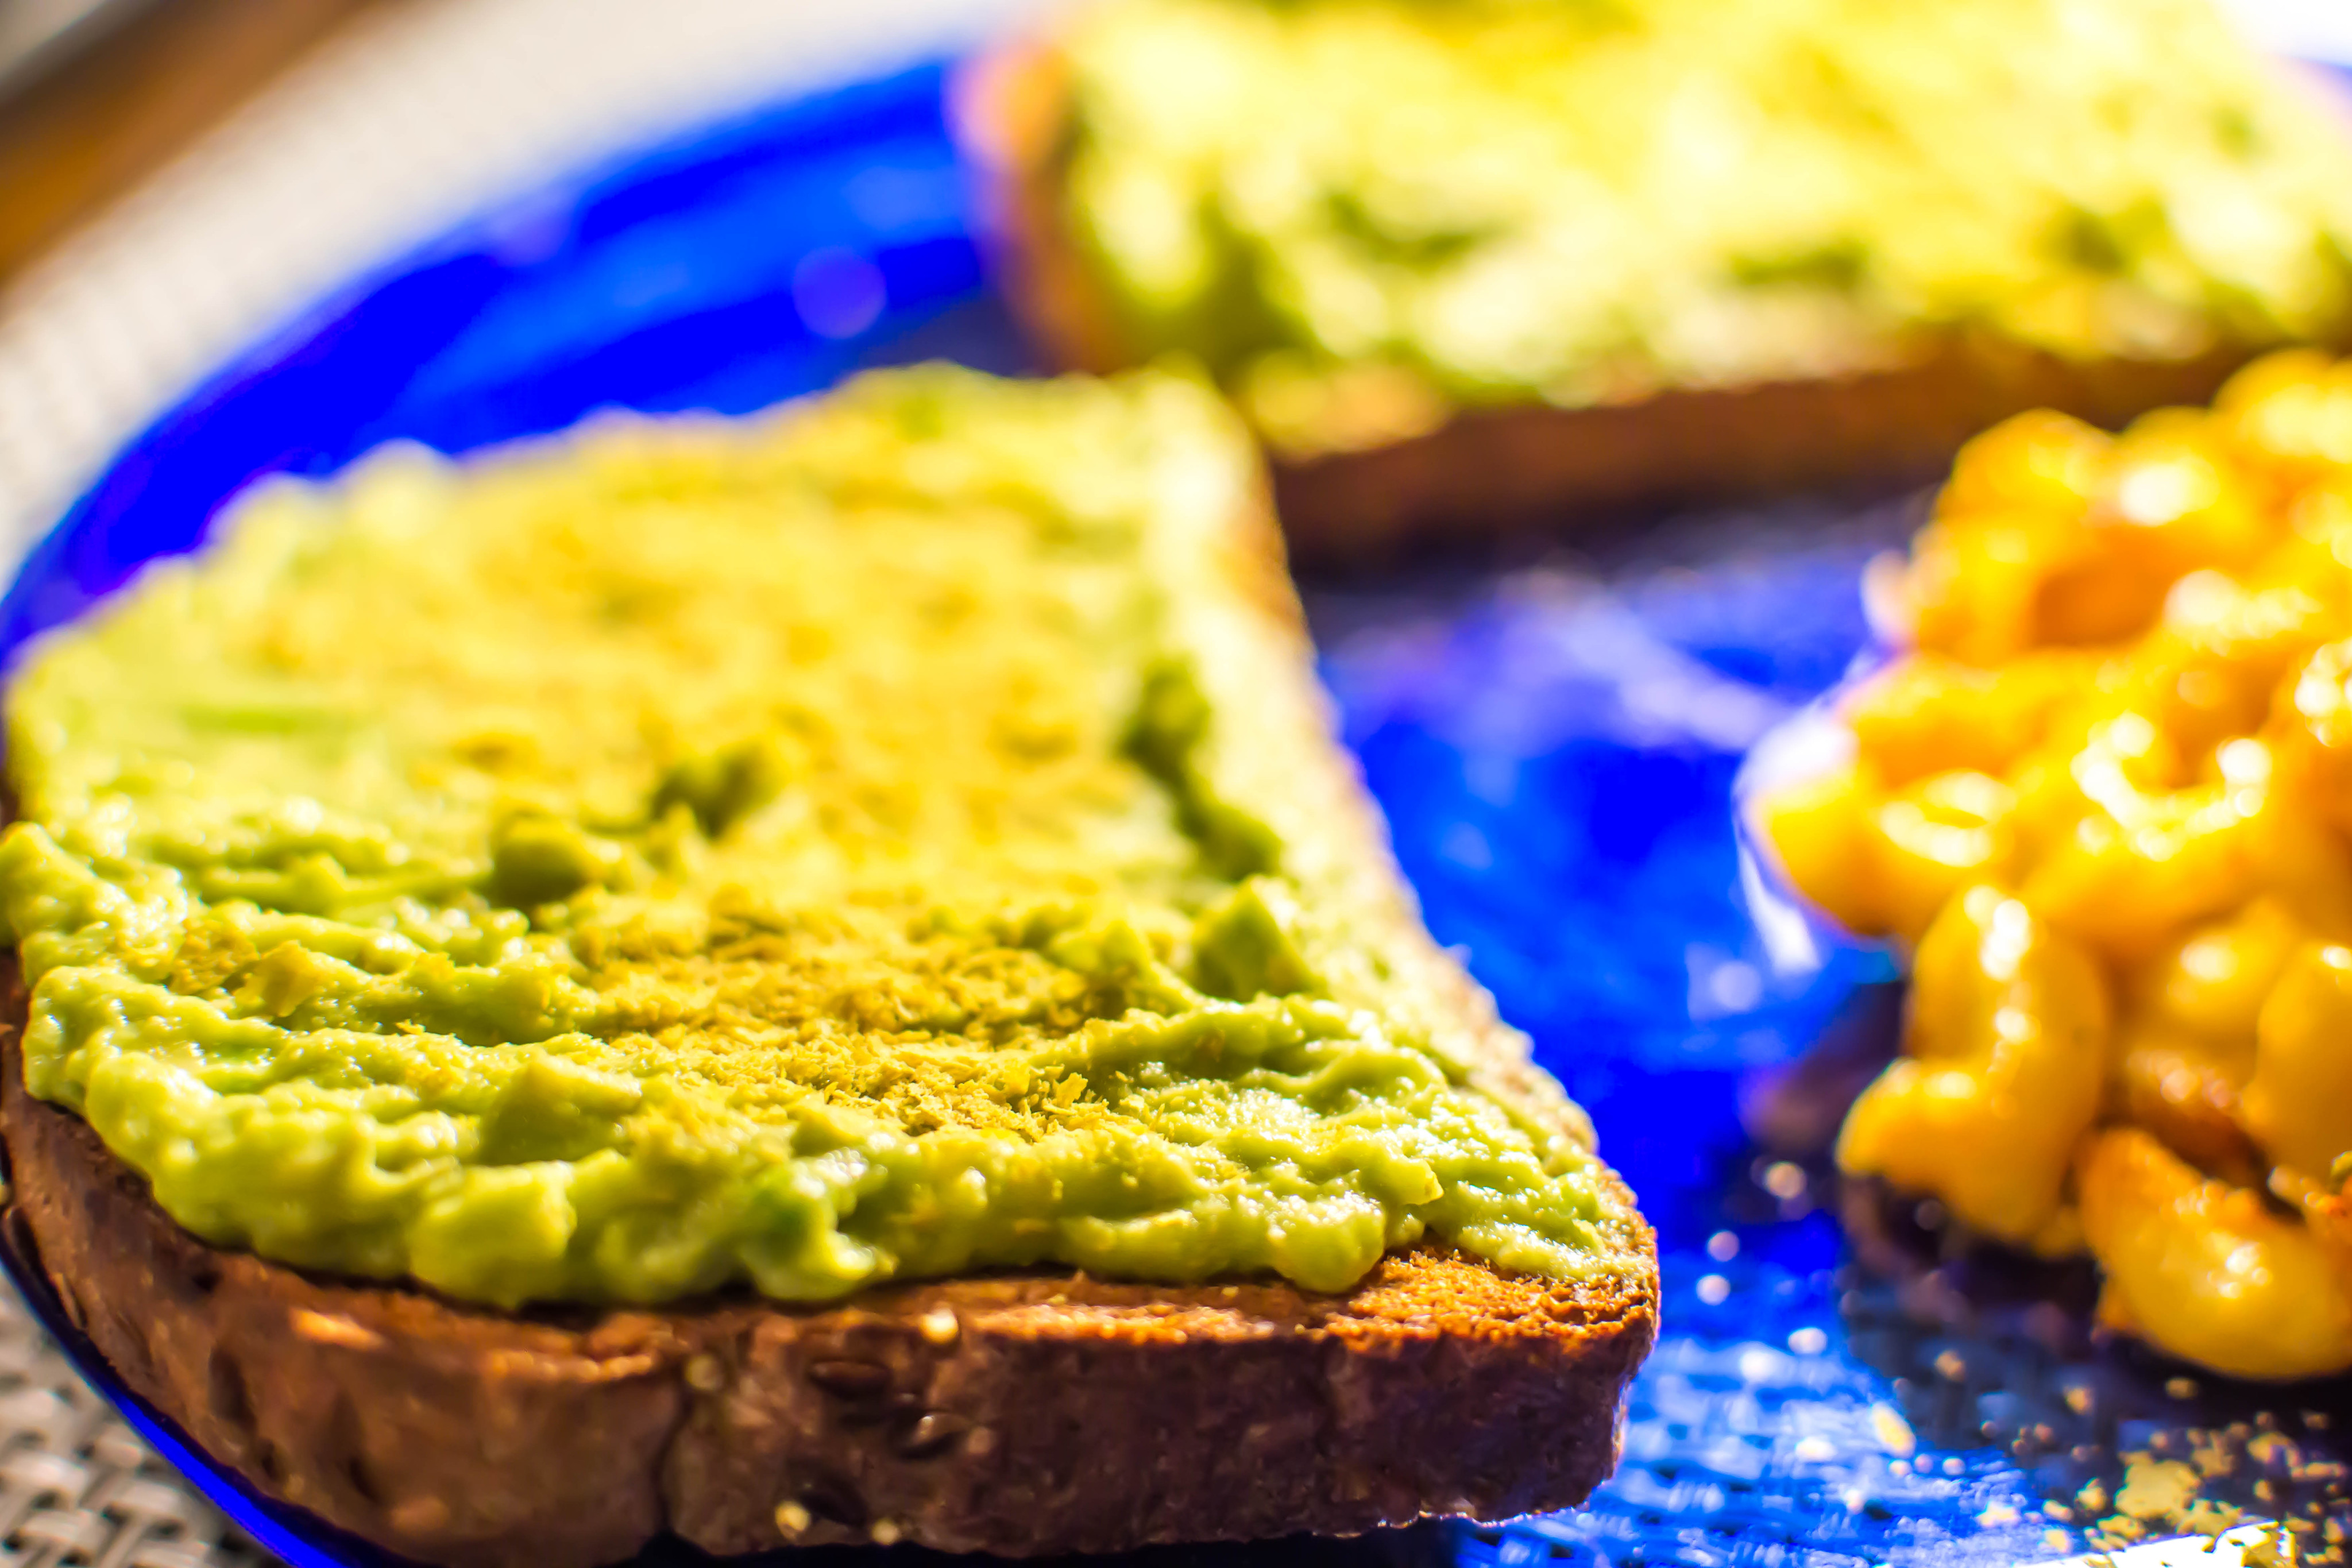 Nutritional yeast, or “nooch”, sprinkled on avocado toast adds a nutty, cheesy flavour. Photo: Shutterstock